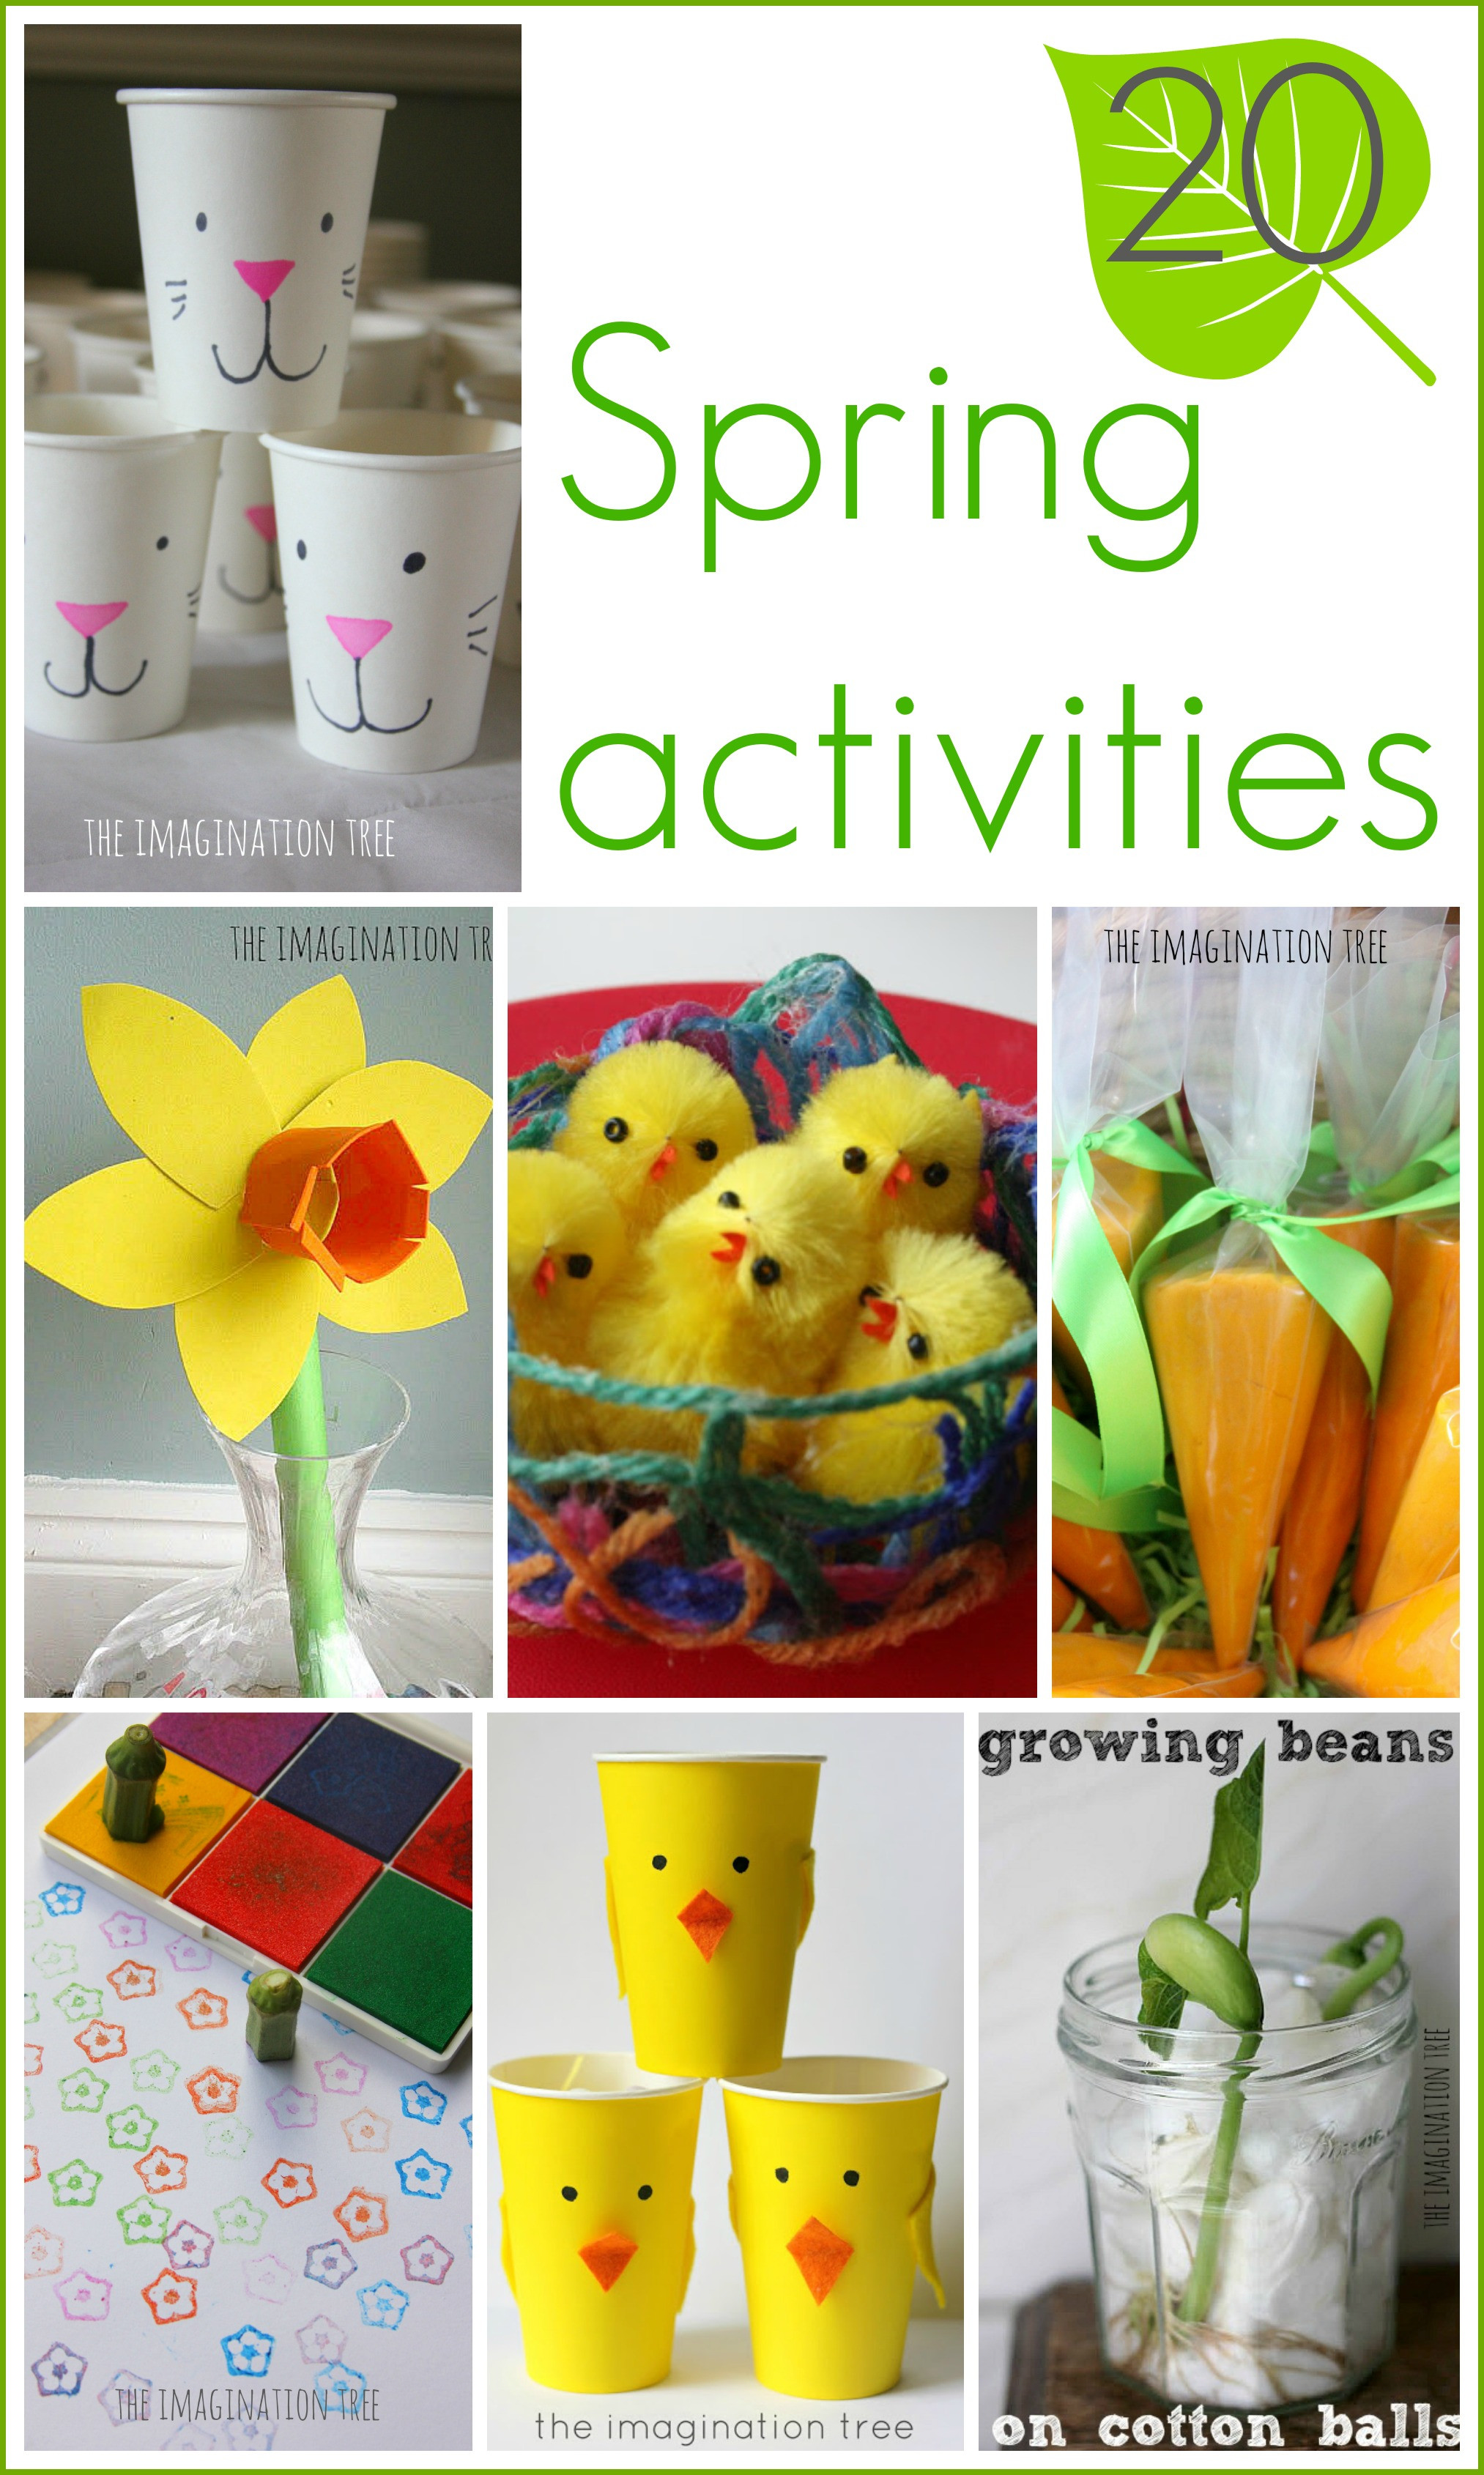 Spring Art Ideas For Preschoolers
 15 Spring Activities for Kids The Imagination Tree